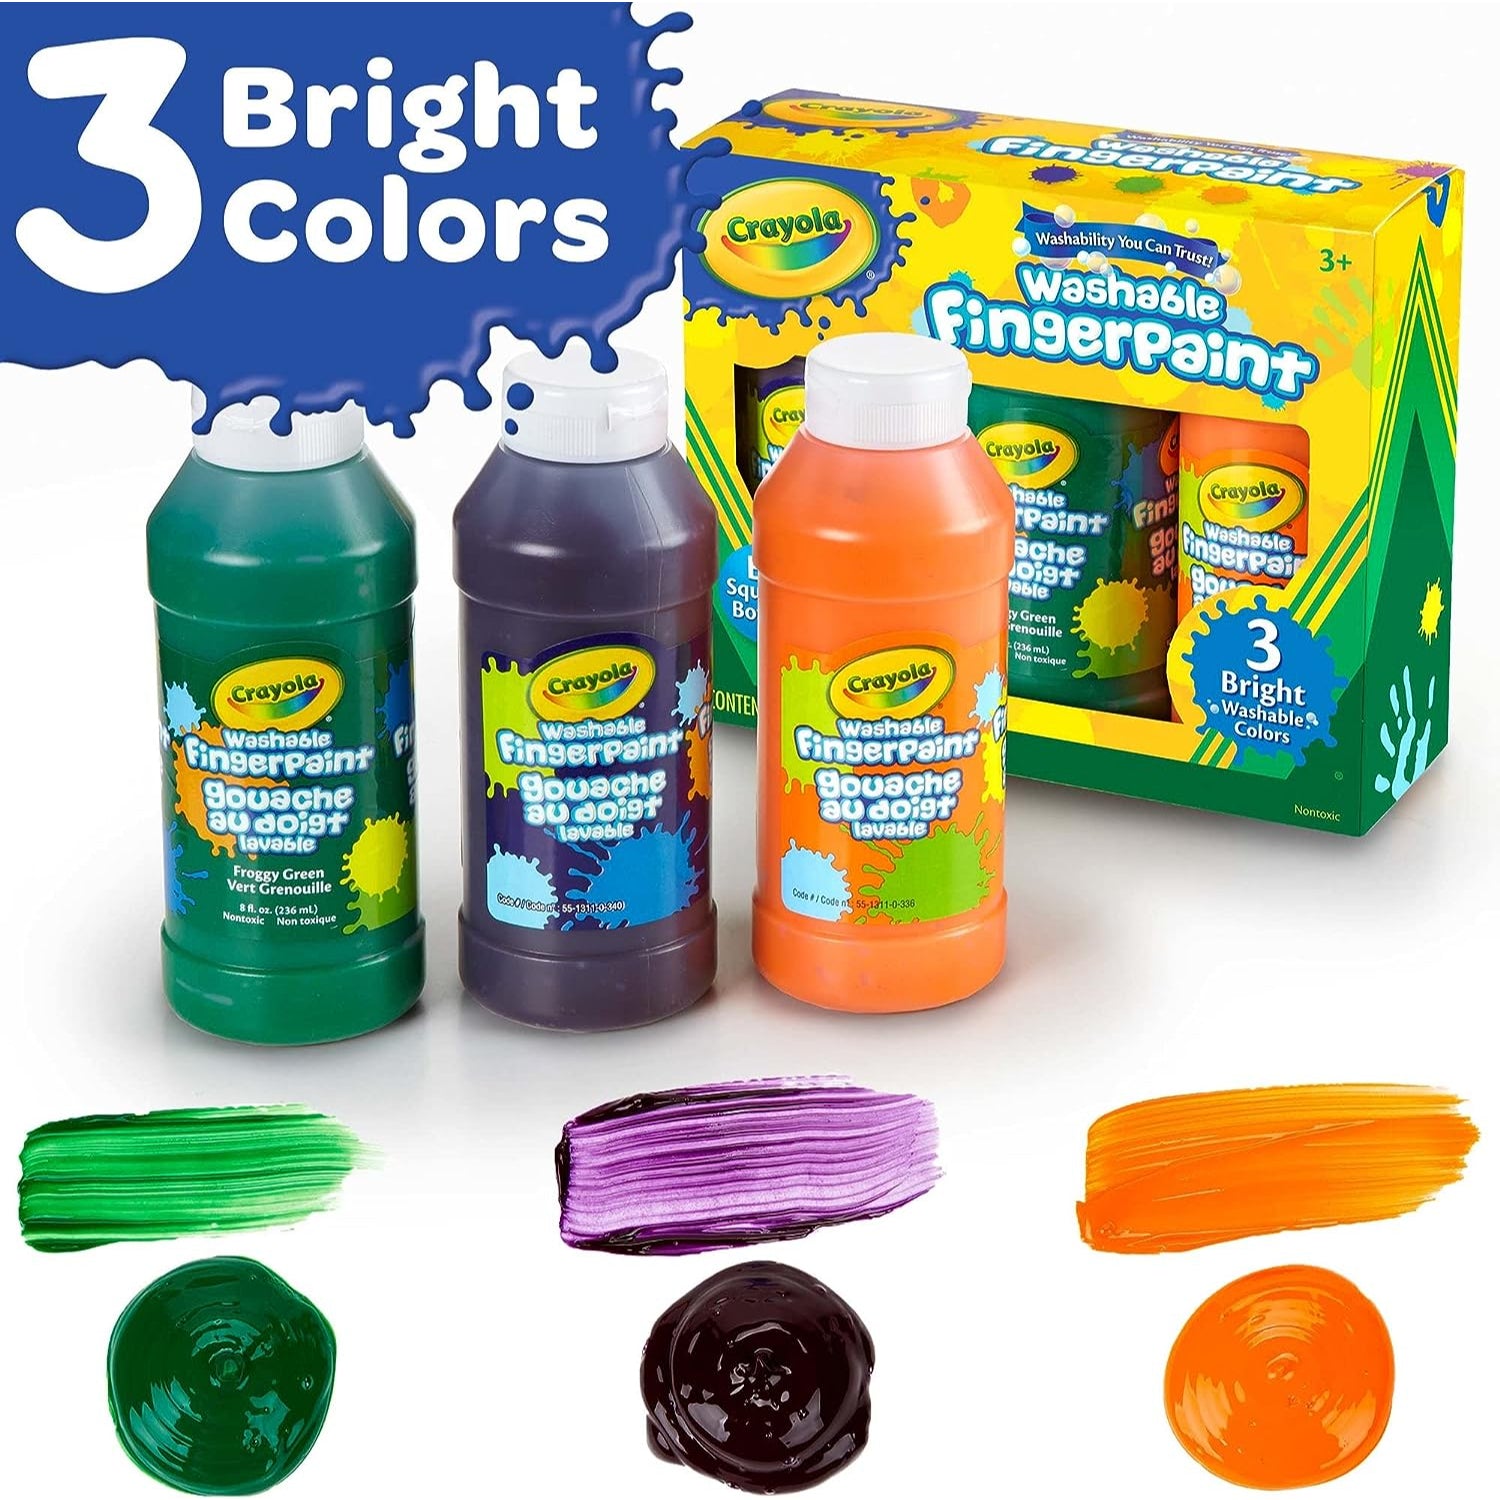 Crayola Washable Fingerpaint Pack, 3 Assorted Bright Colors, 8 oz